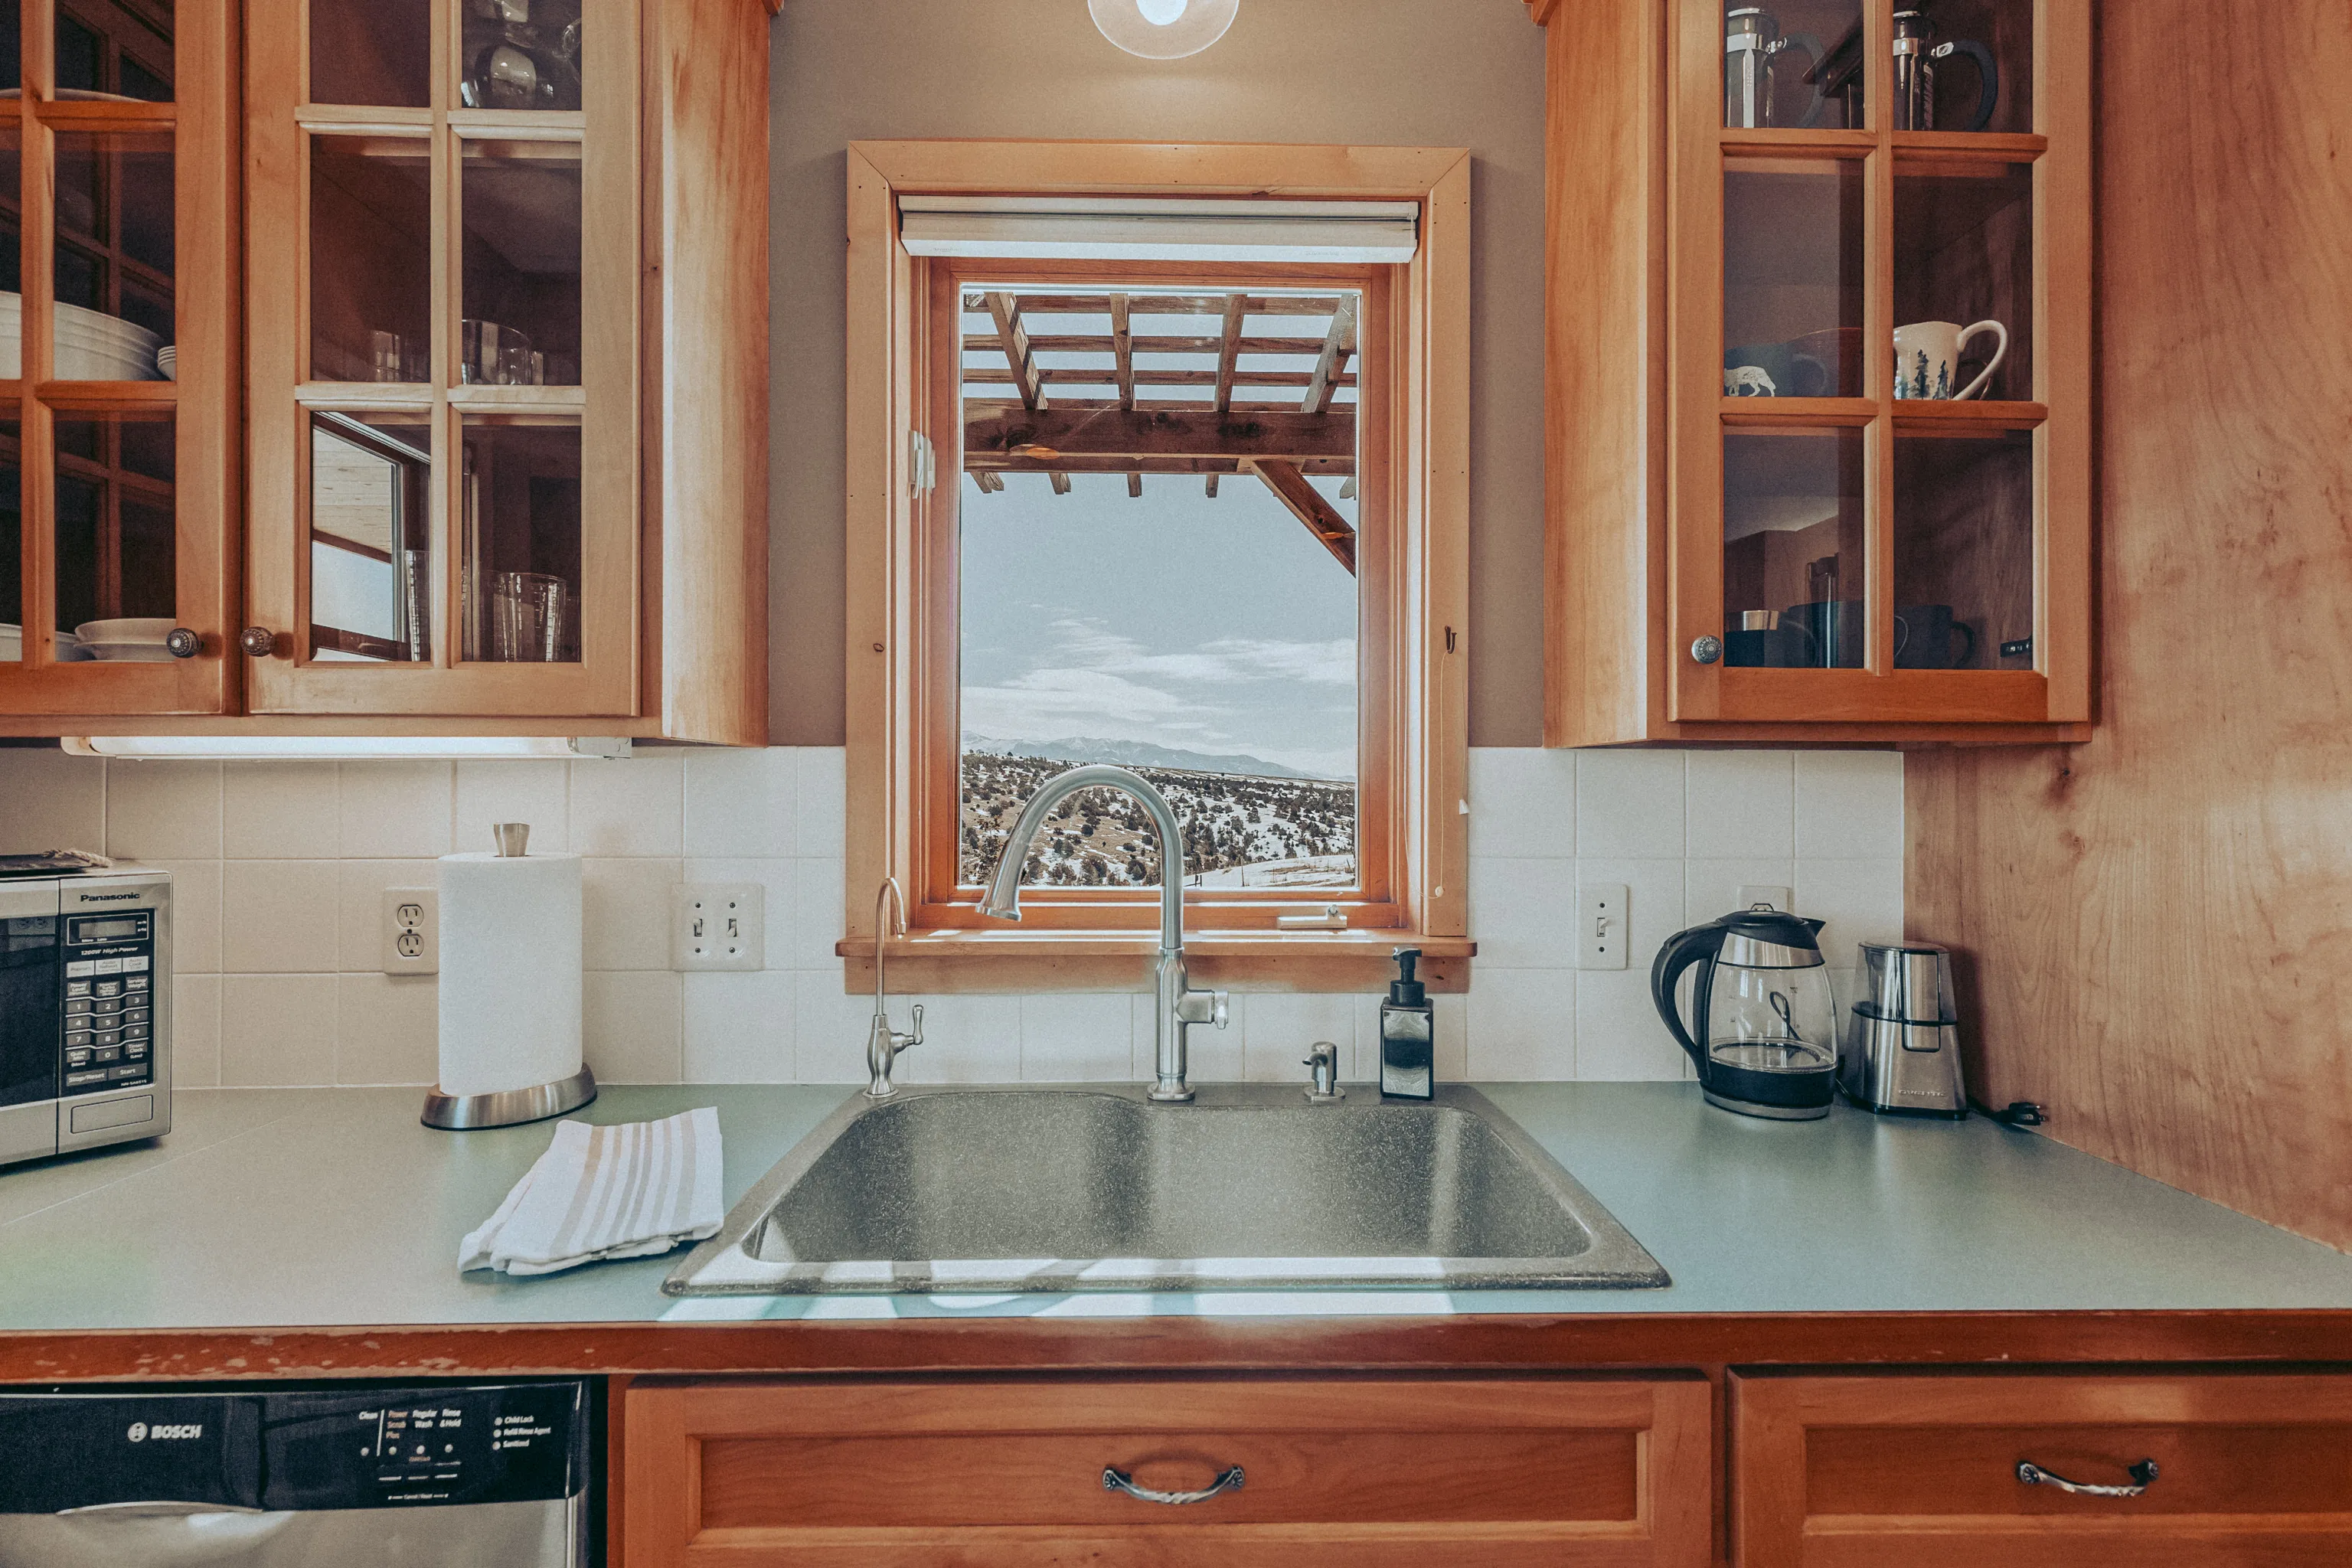 Kitchen sink with outdoor view